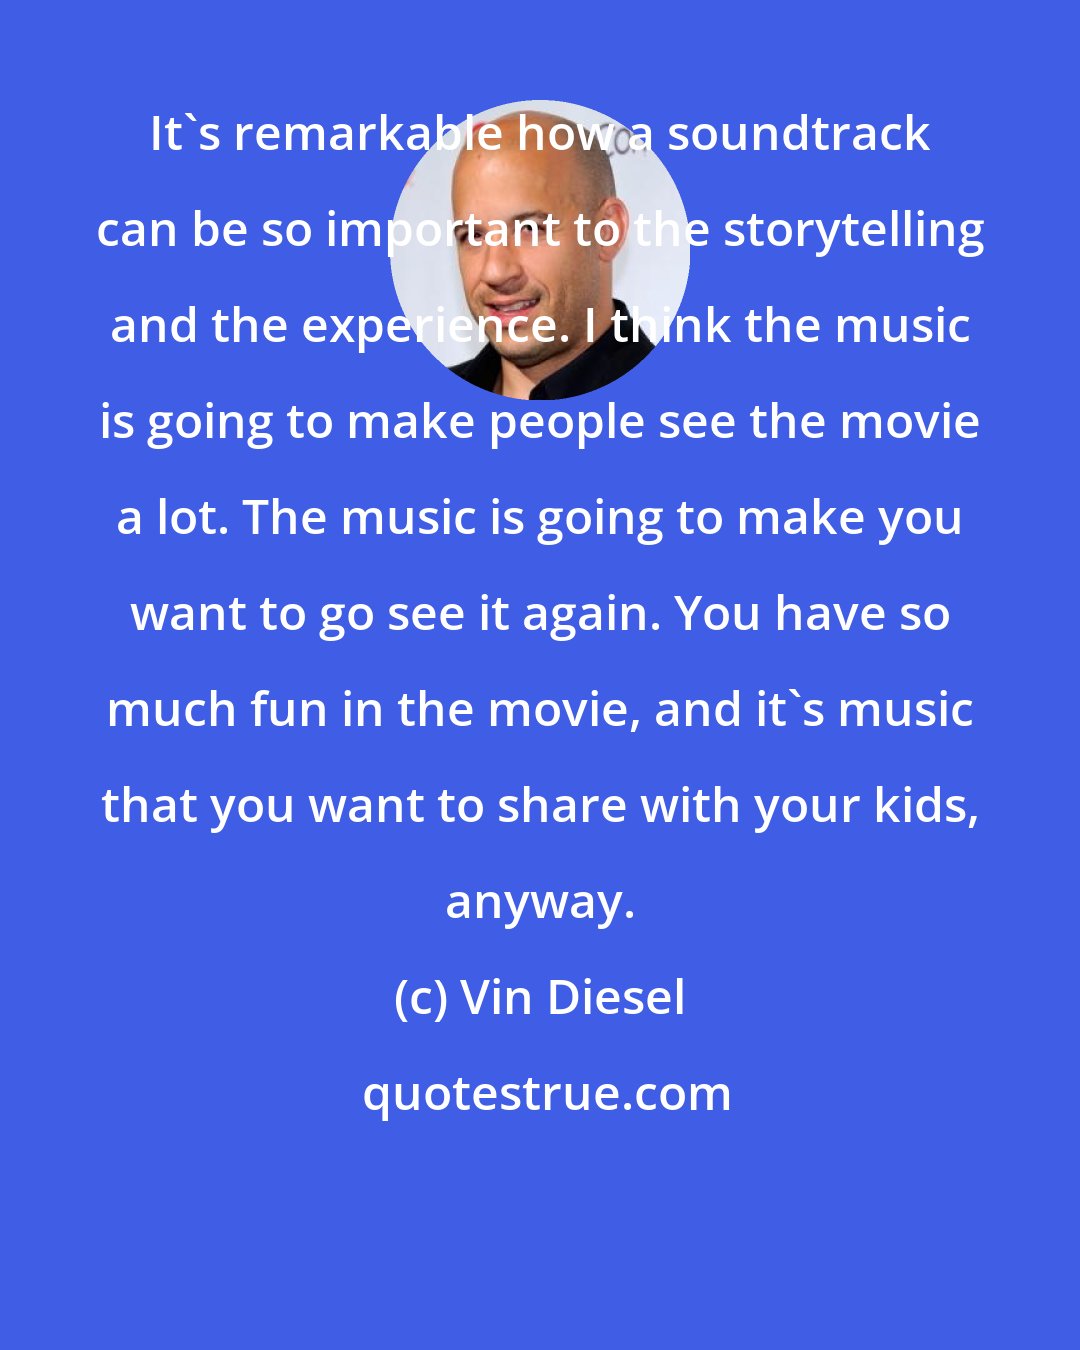 Vin Diesel: It's remarkable how a soundtrack can be so important to the storytelling and the experience. I think the music is going to make people see the movie a lot. The music is going to make you want to go see it again. You have so much fun in the movie, and it's music that you want to share with your kids, anyway.